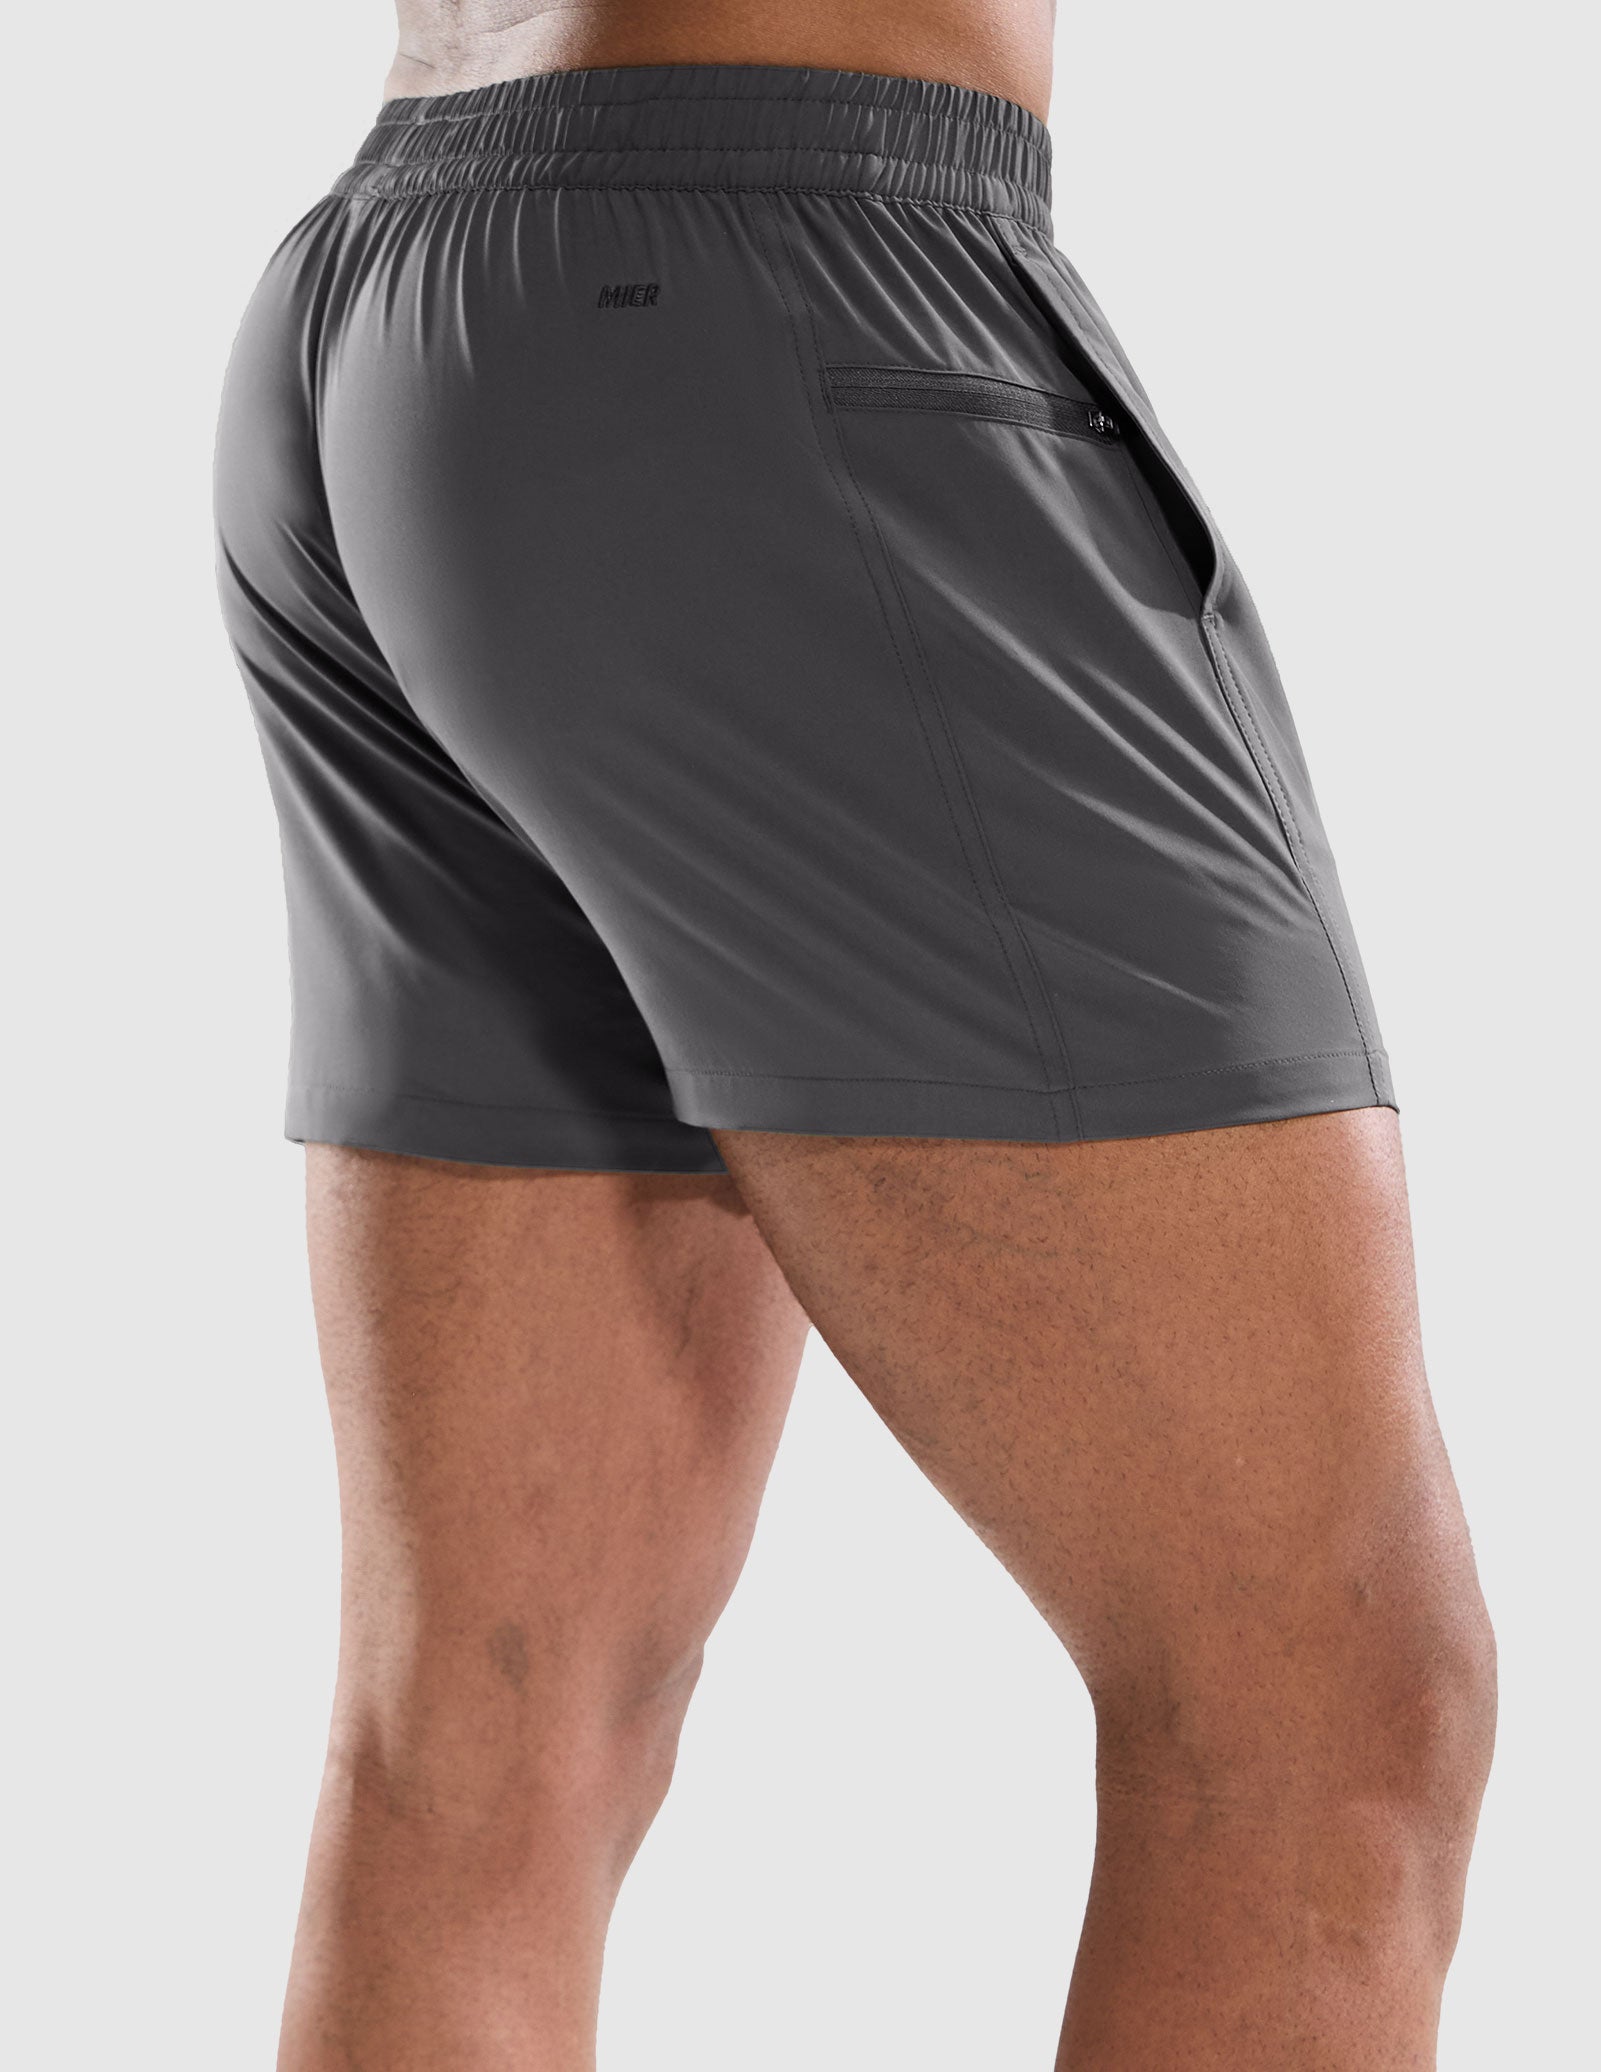 Men's 3 Inch Athletic Running Shorts with Brief Liner